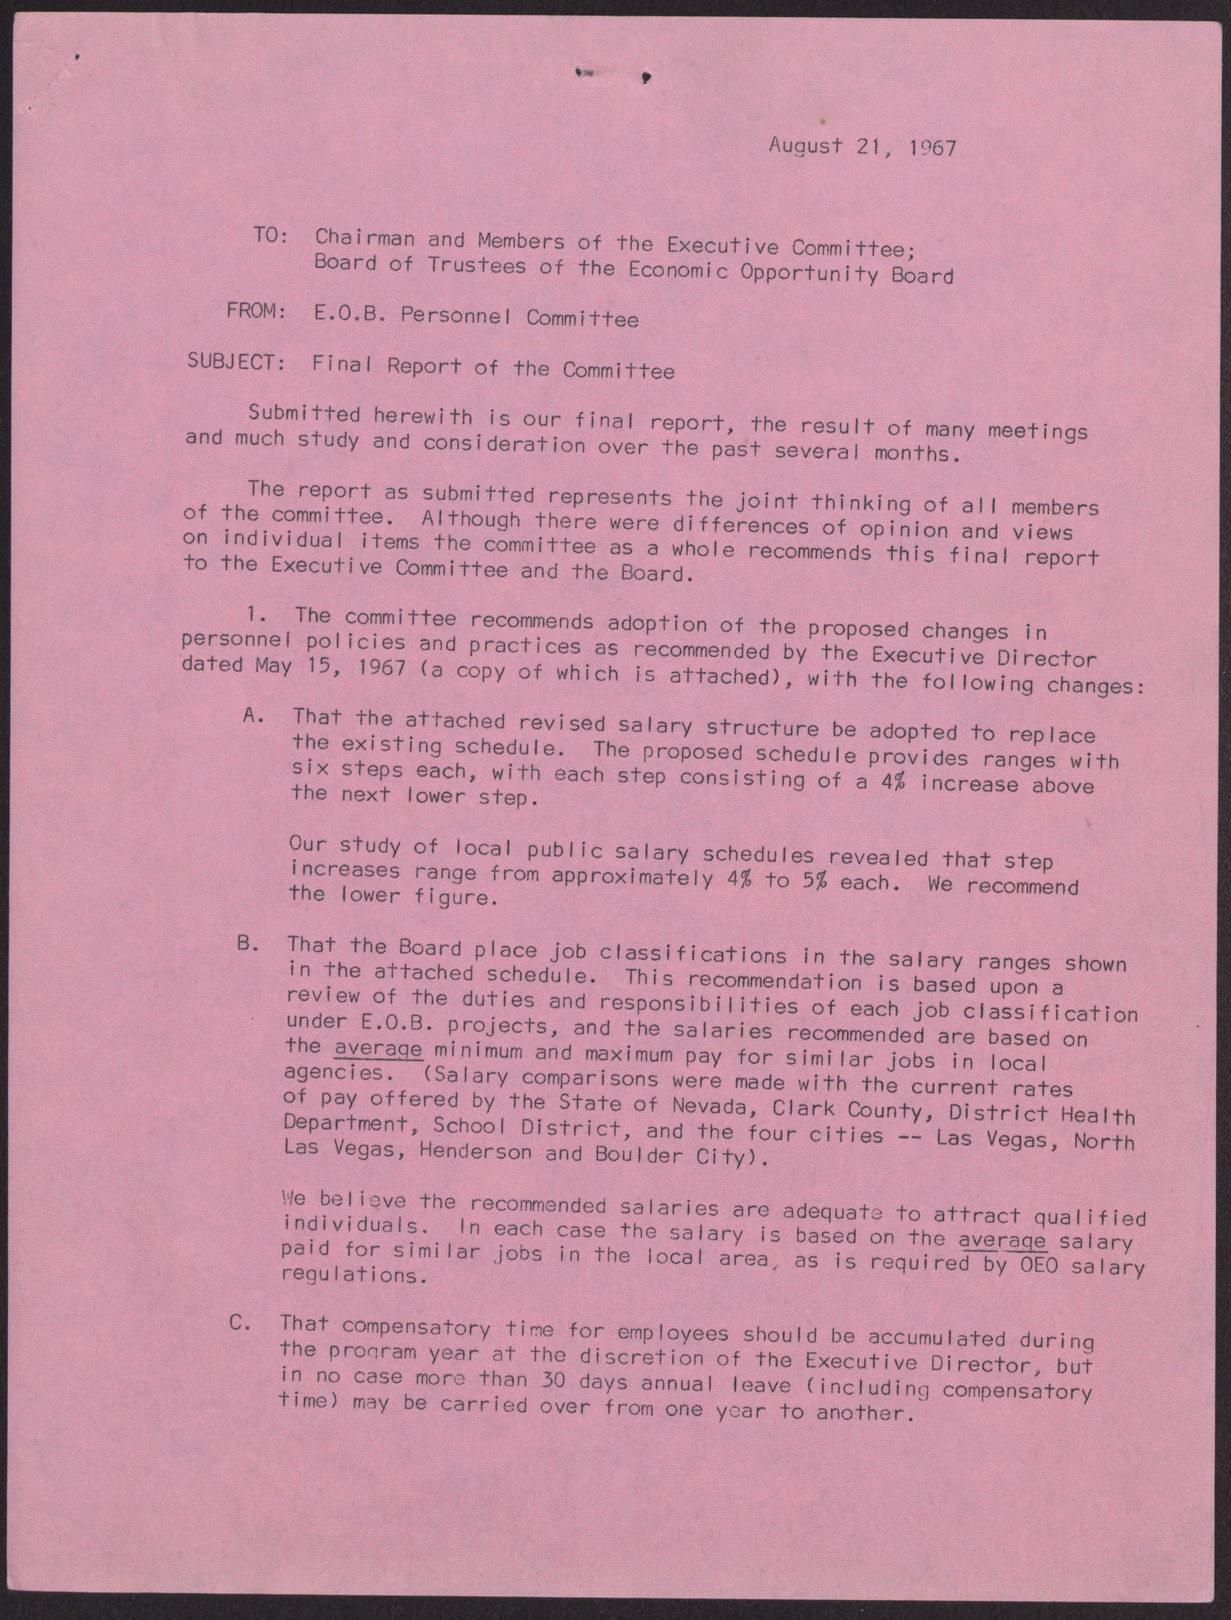 Letter and final report of the EOB Personnel Committee (9 pages), August 21, 1967